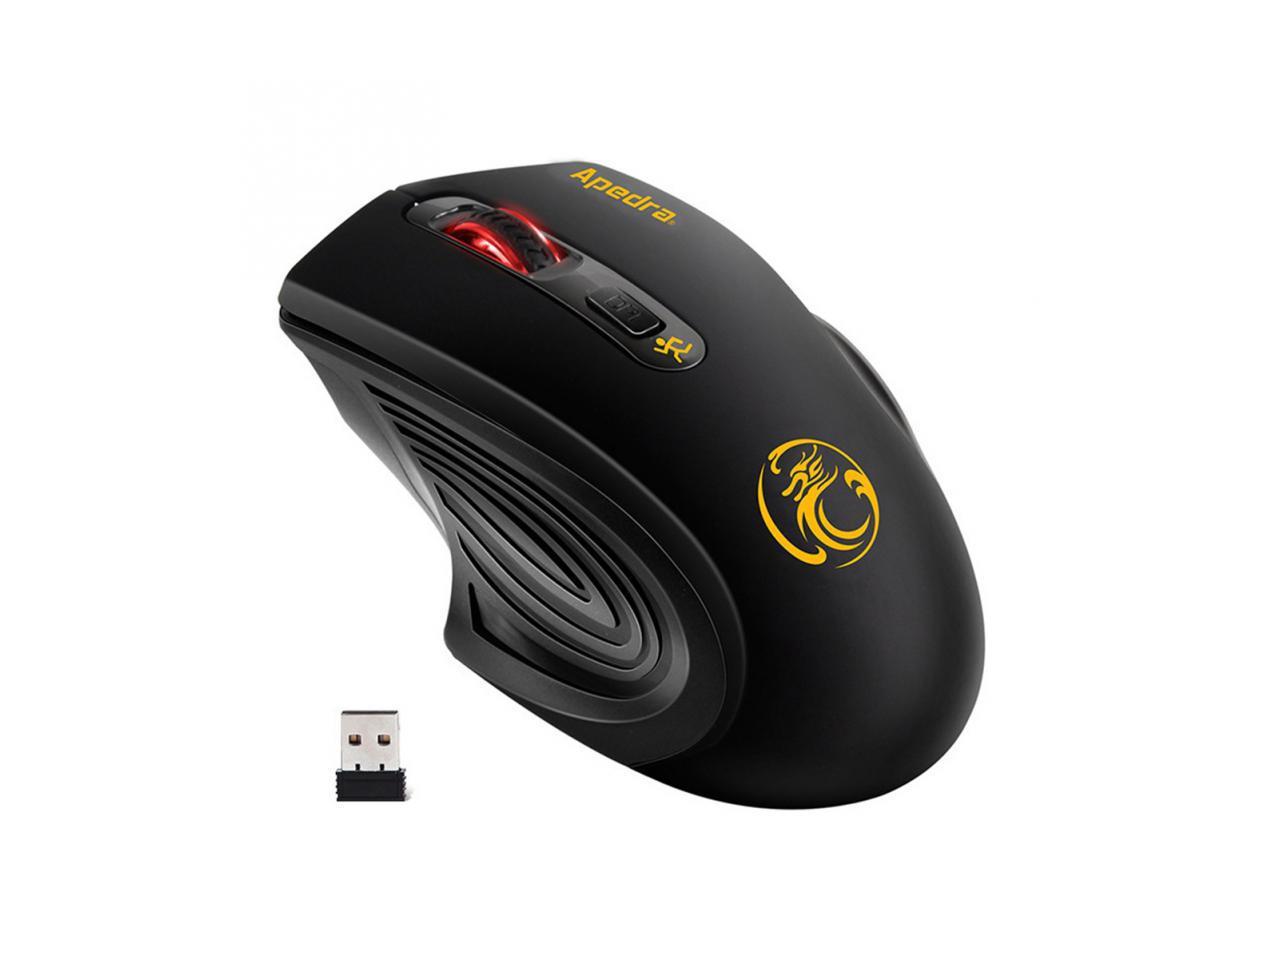 2.4GHz Wireless Optical USB Gaming Mouse Mice 1600DPI For Computer PC Laptop NEW 